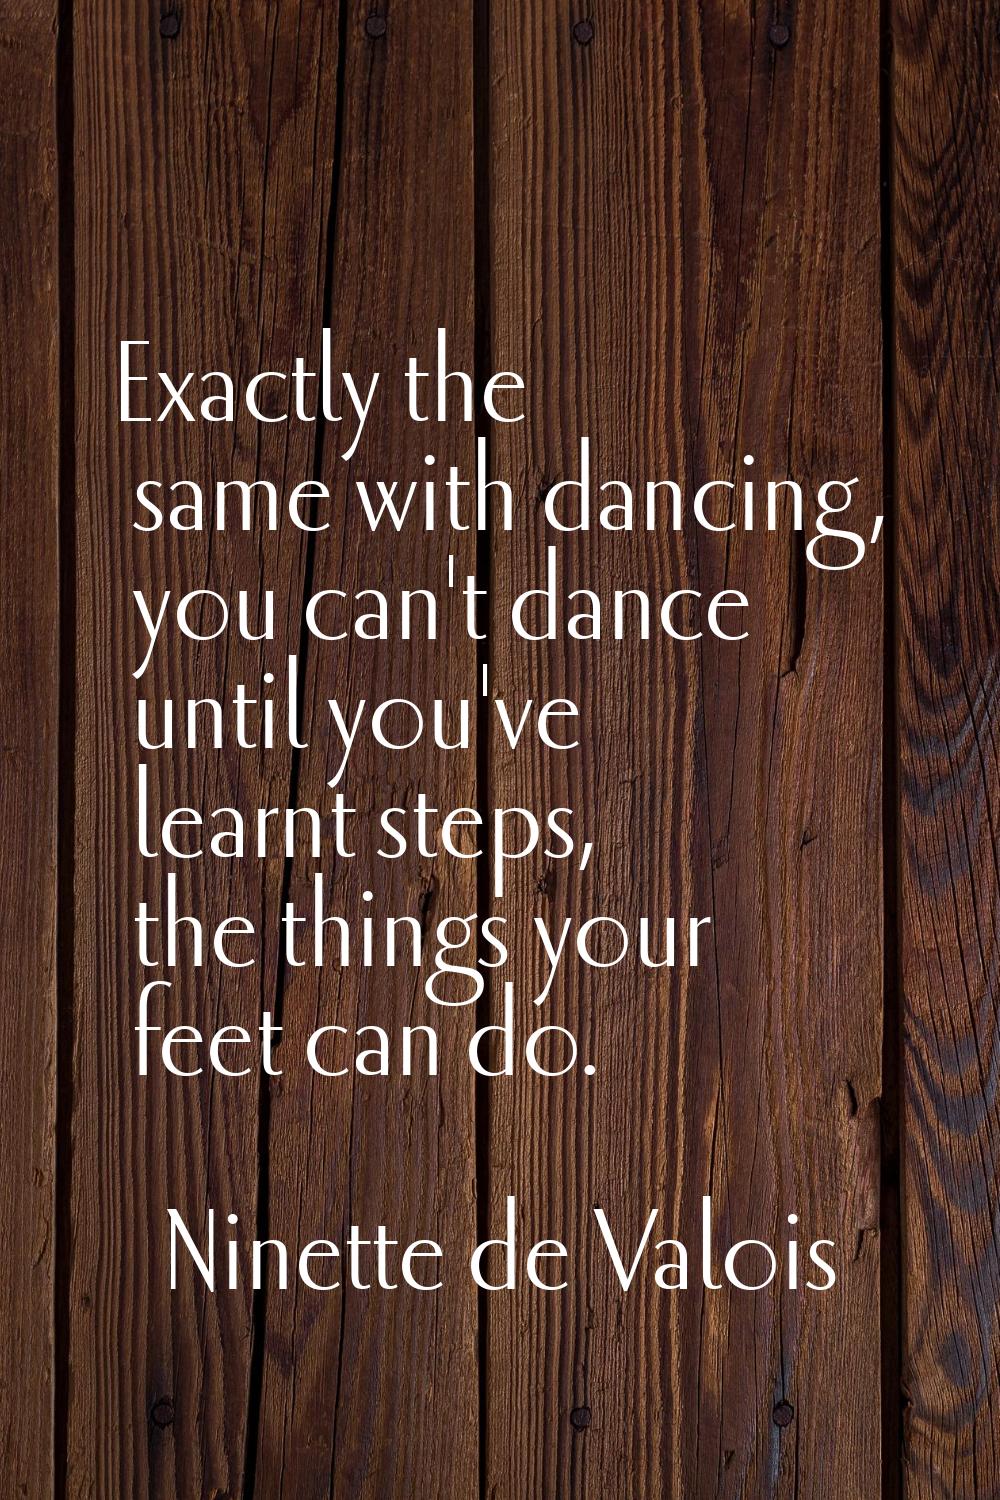 Exactly the same with dancing, you can't dance until you've learnt steps, the things your feet can 